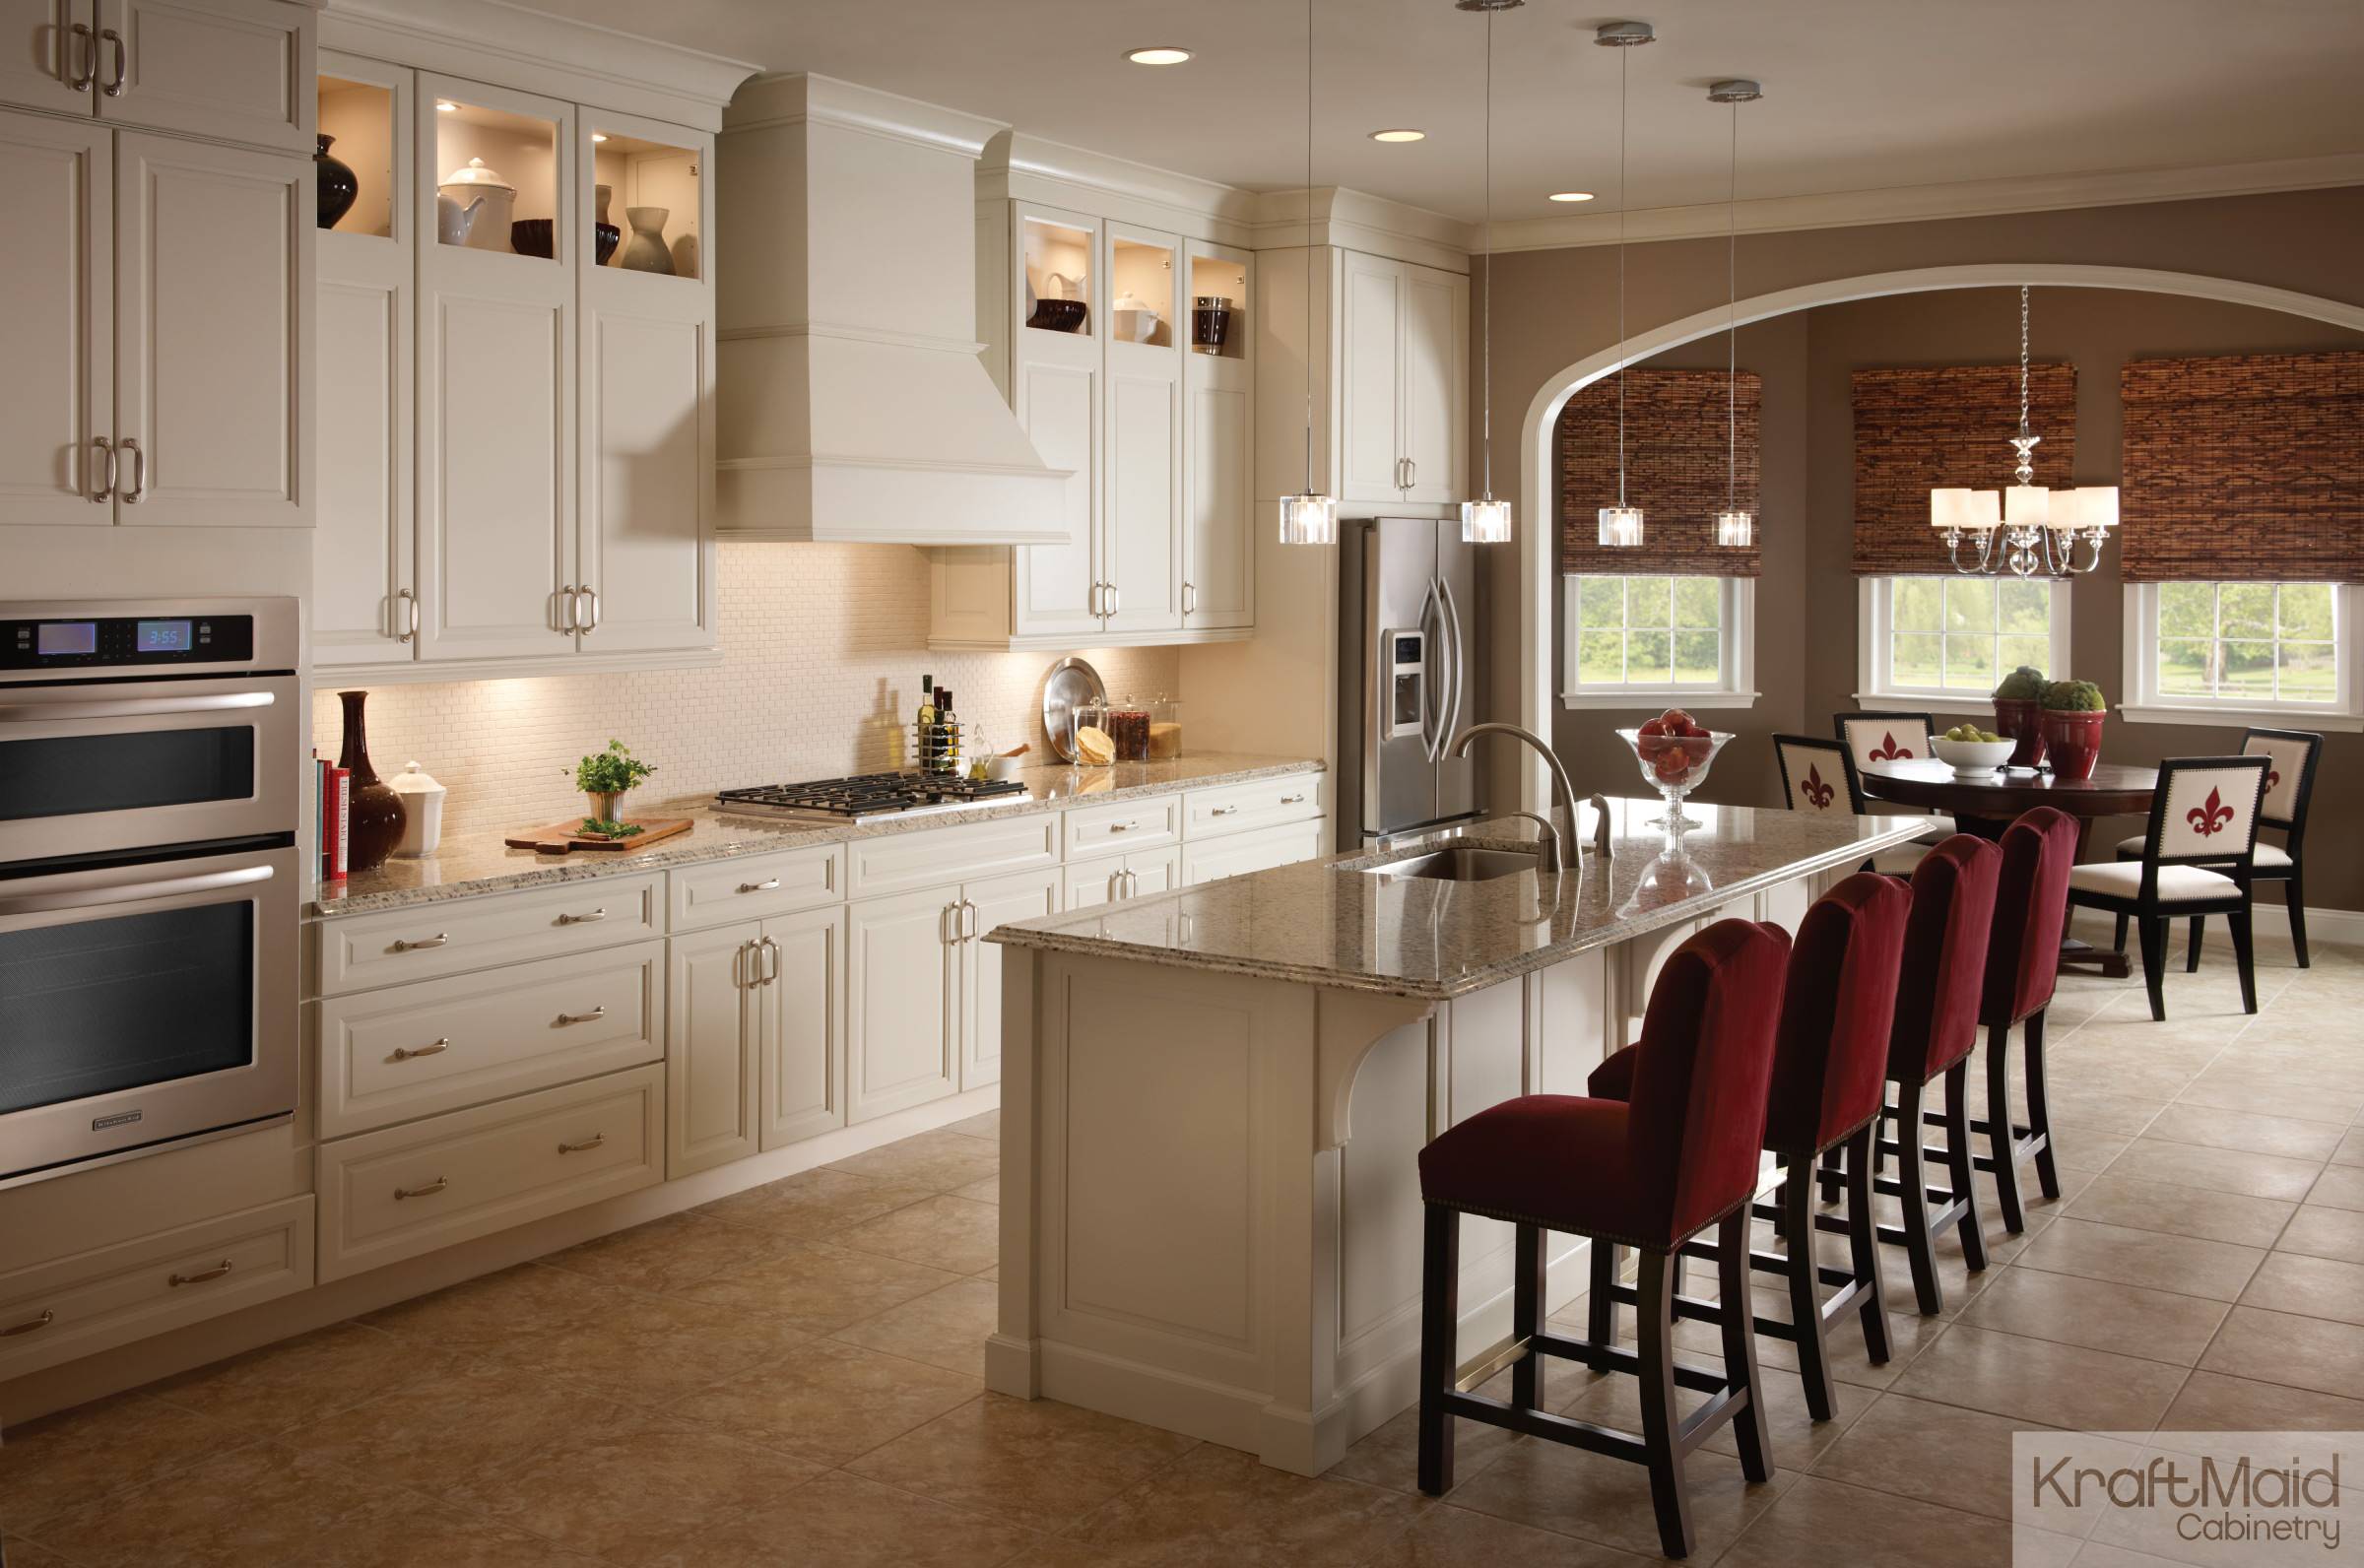 Kraftmaid Maple Cabinetry In Canvas, How Expensive Are Kraftmaid Cabinets